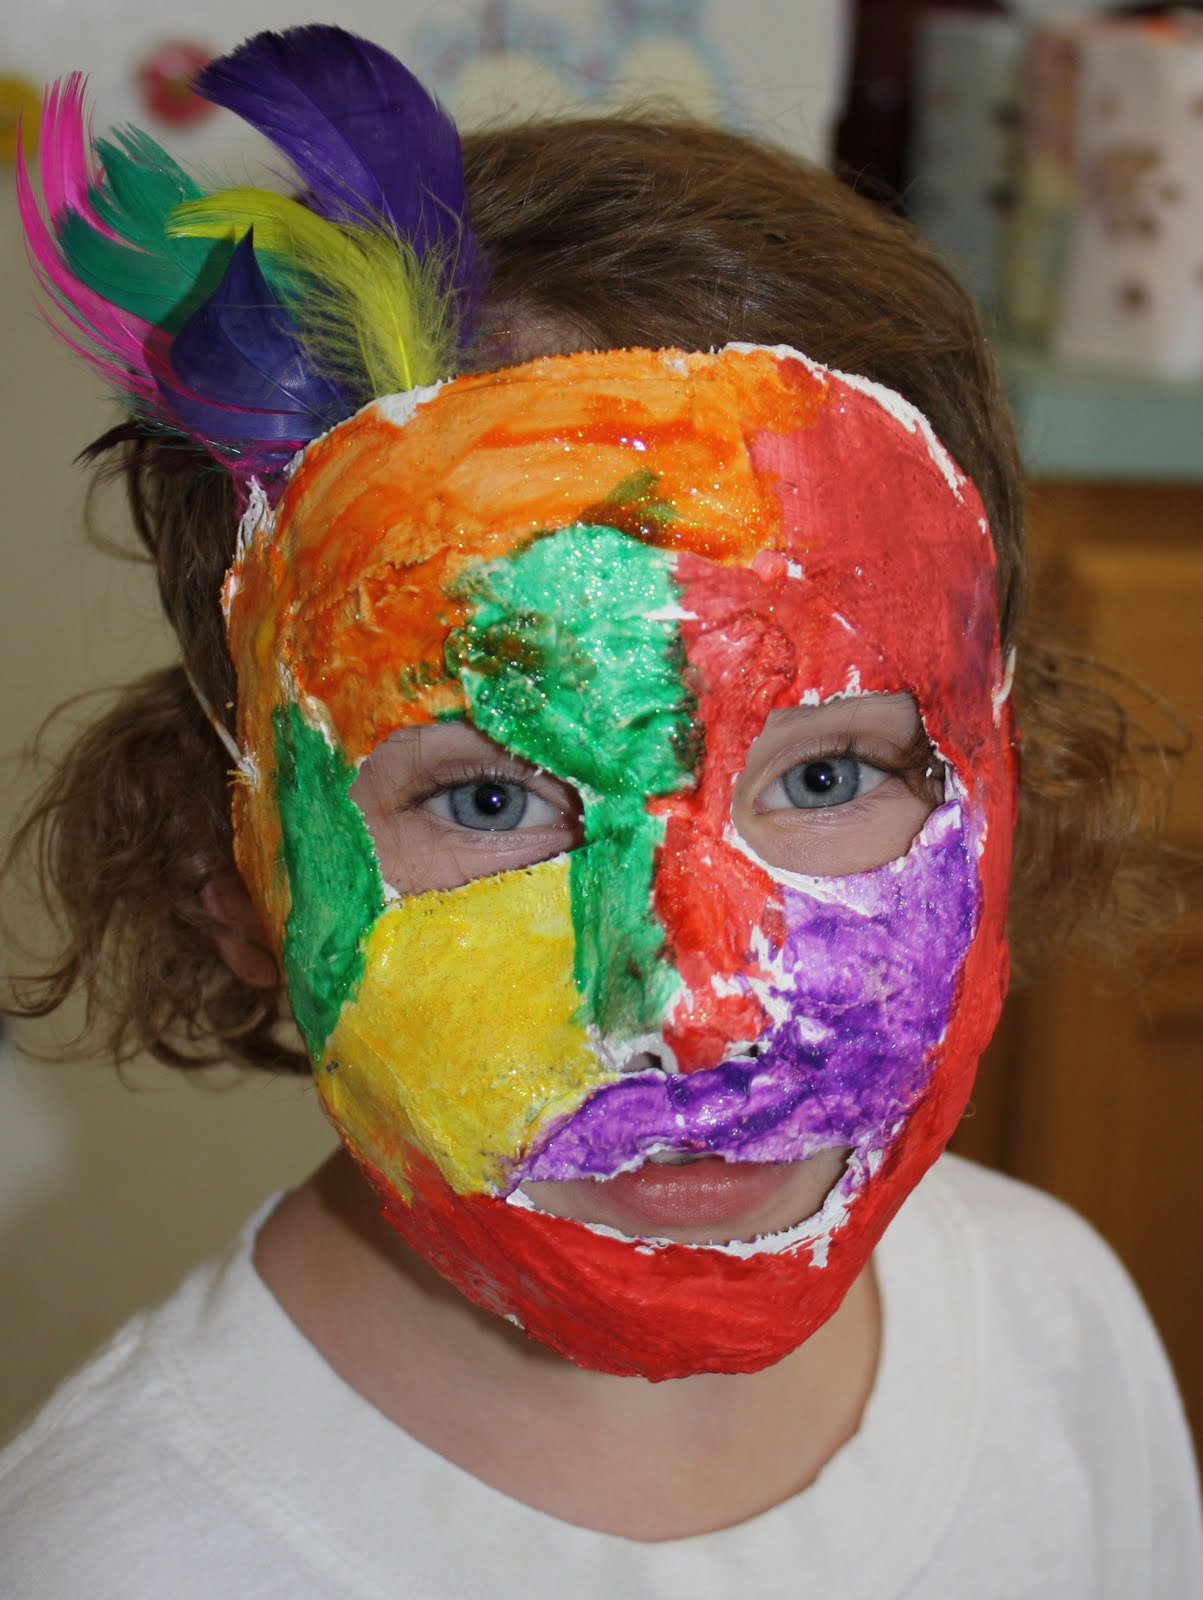 Children's Summer Arts and Crafts: Painting Masks